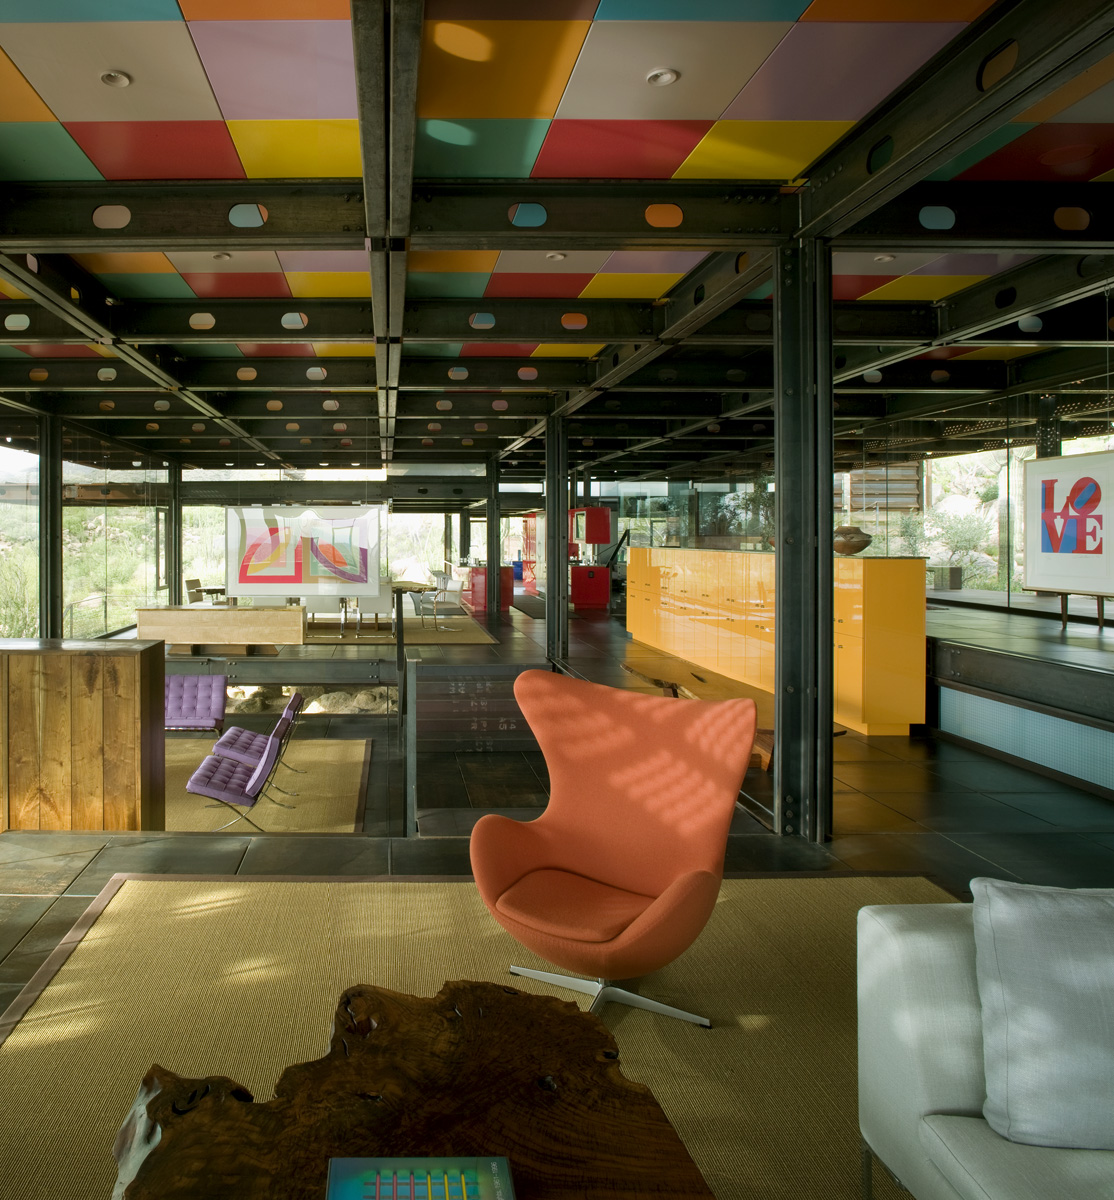 The open floor design of Relic Rock is presented with colorful furniture, ceilings and rugs.